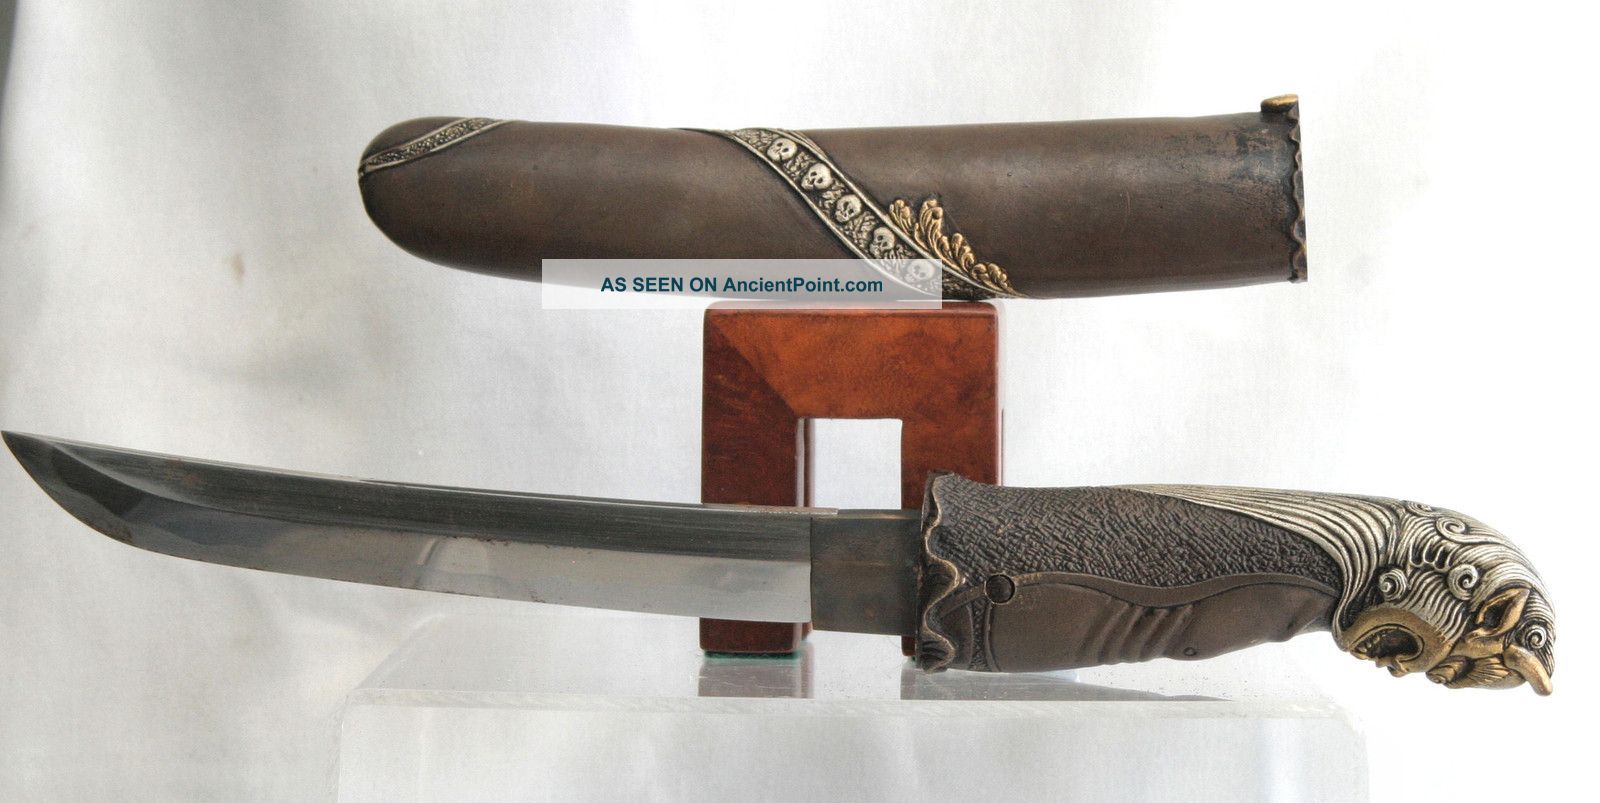 Exquisite World War Ii Japanese Dagger With Gilted Silver Inlaid Circa 1940s Military photo